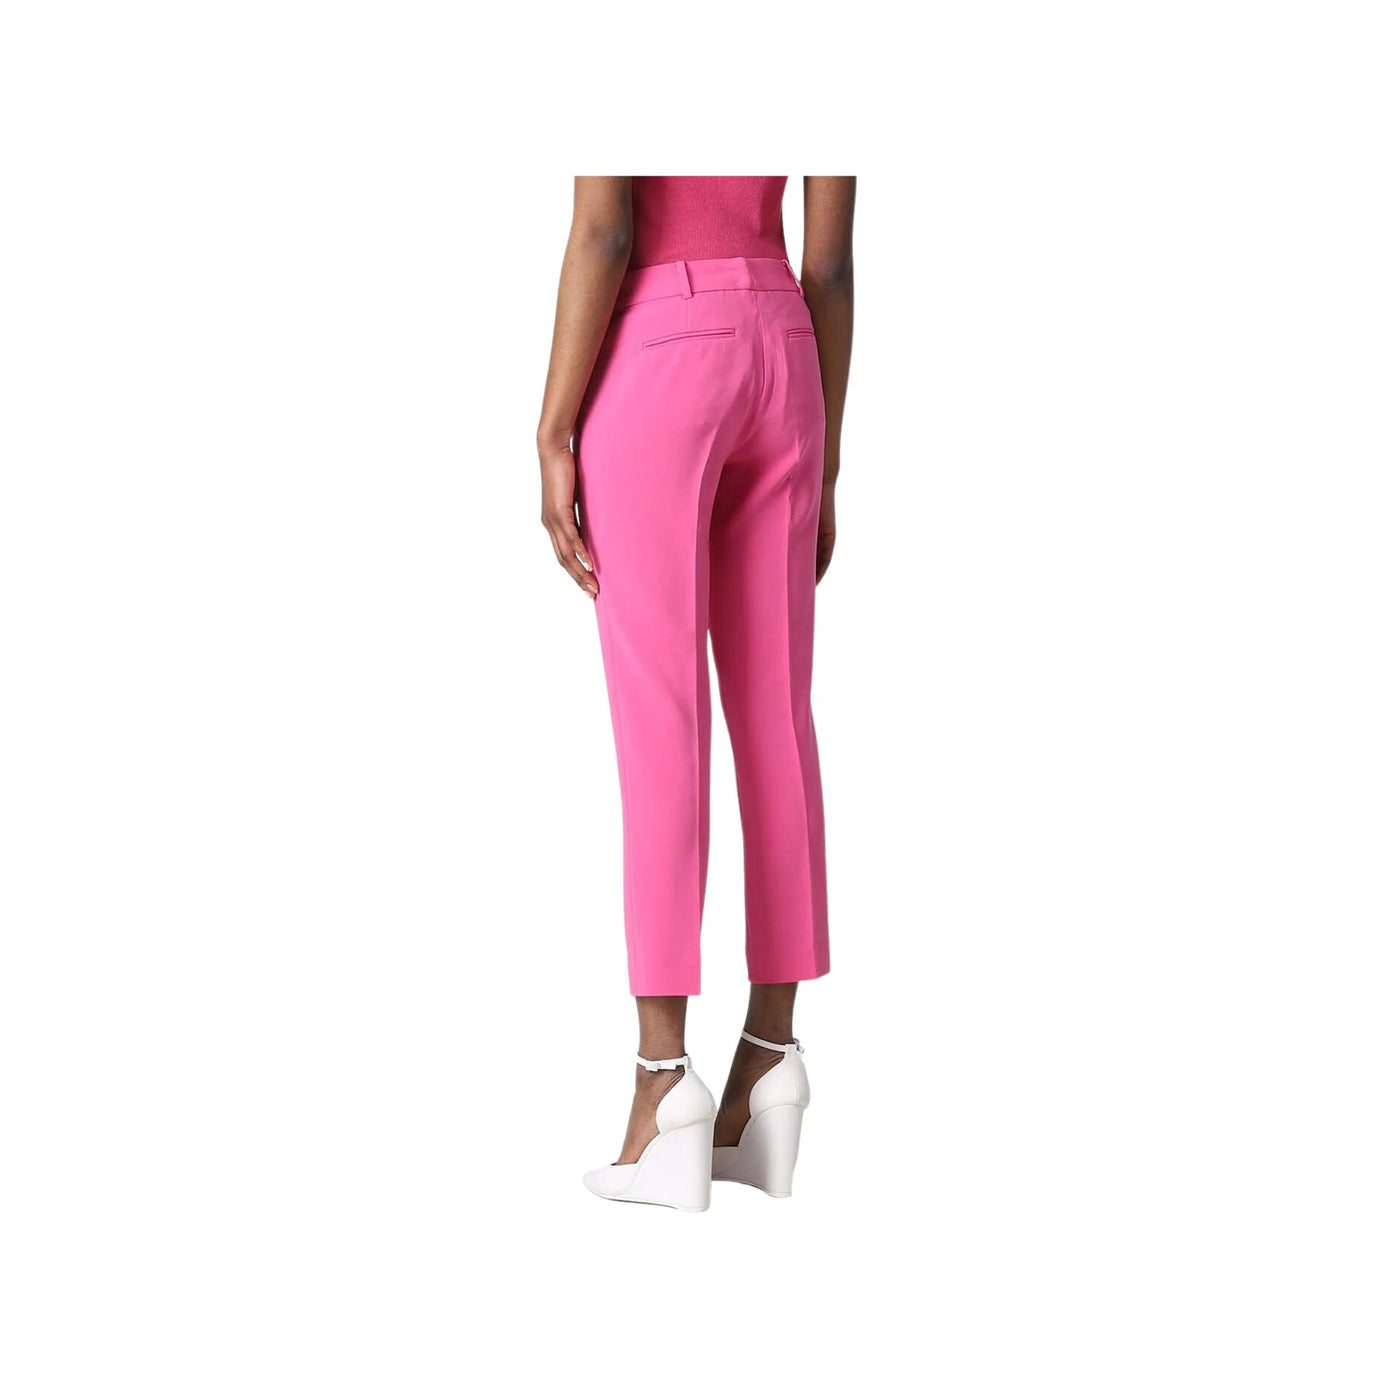 Straight line women's trousers